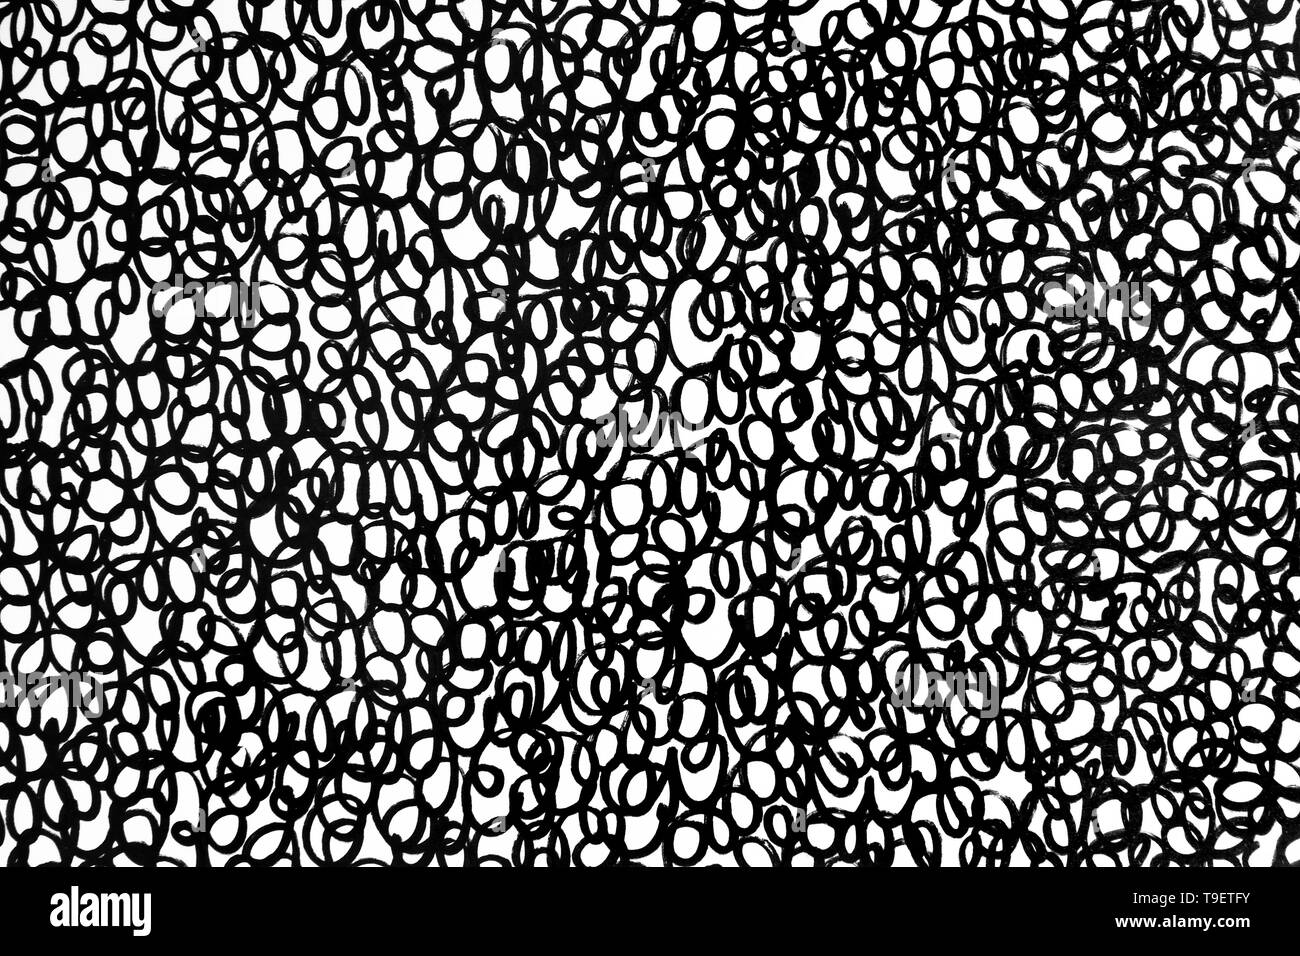 Black and white handmade background drawn with a pen Stock Photo